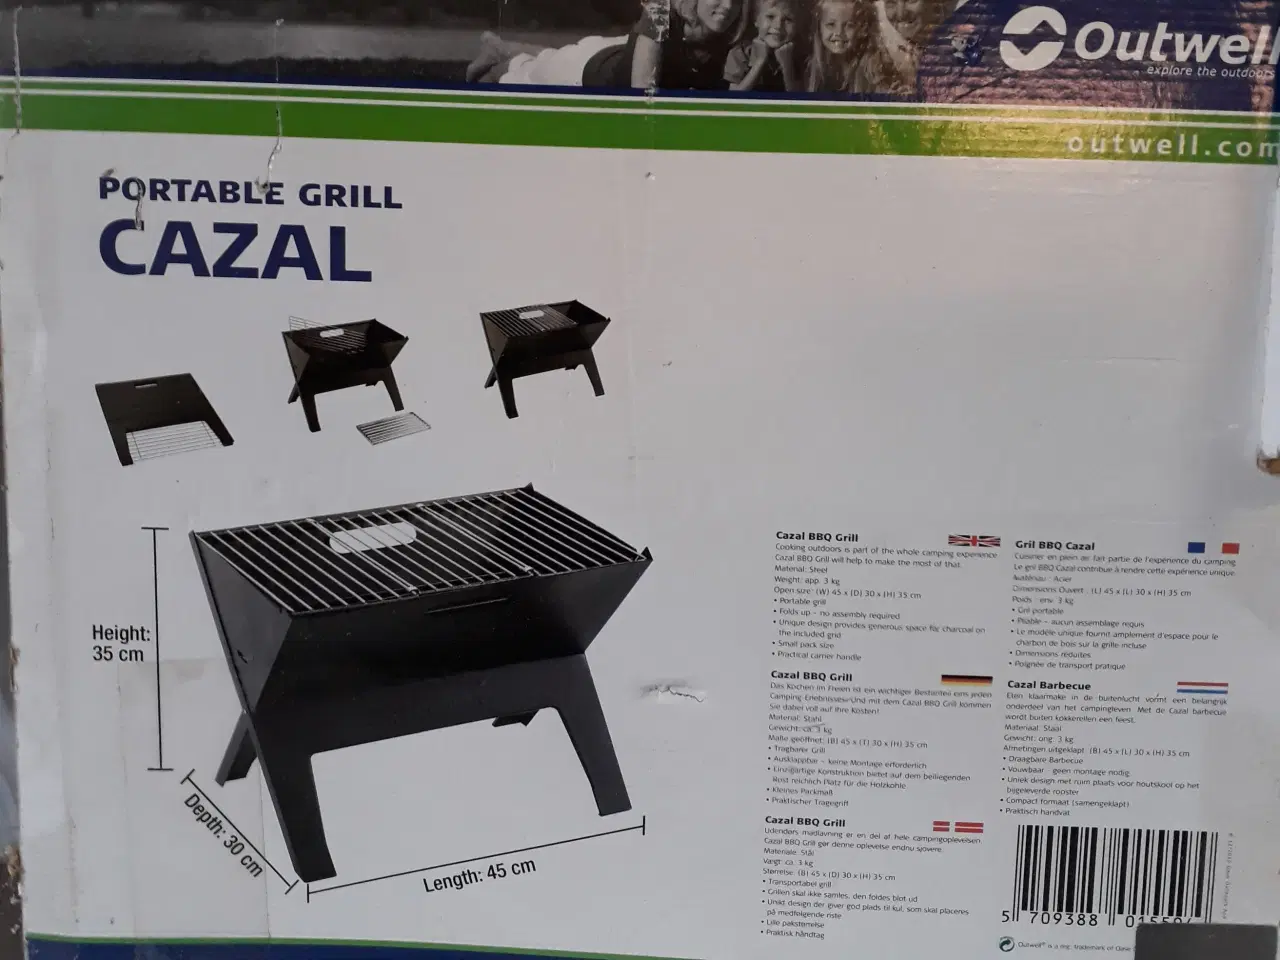 Billede 1 - Outwell grill (campinggrill)